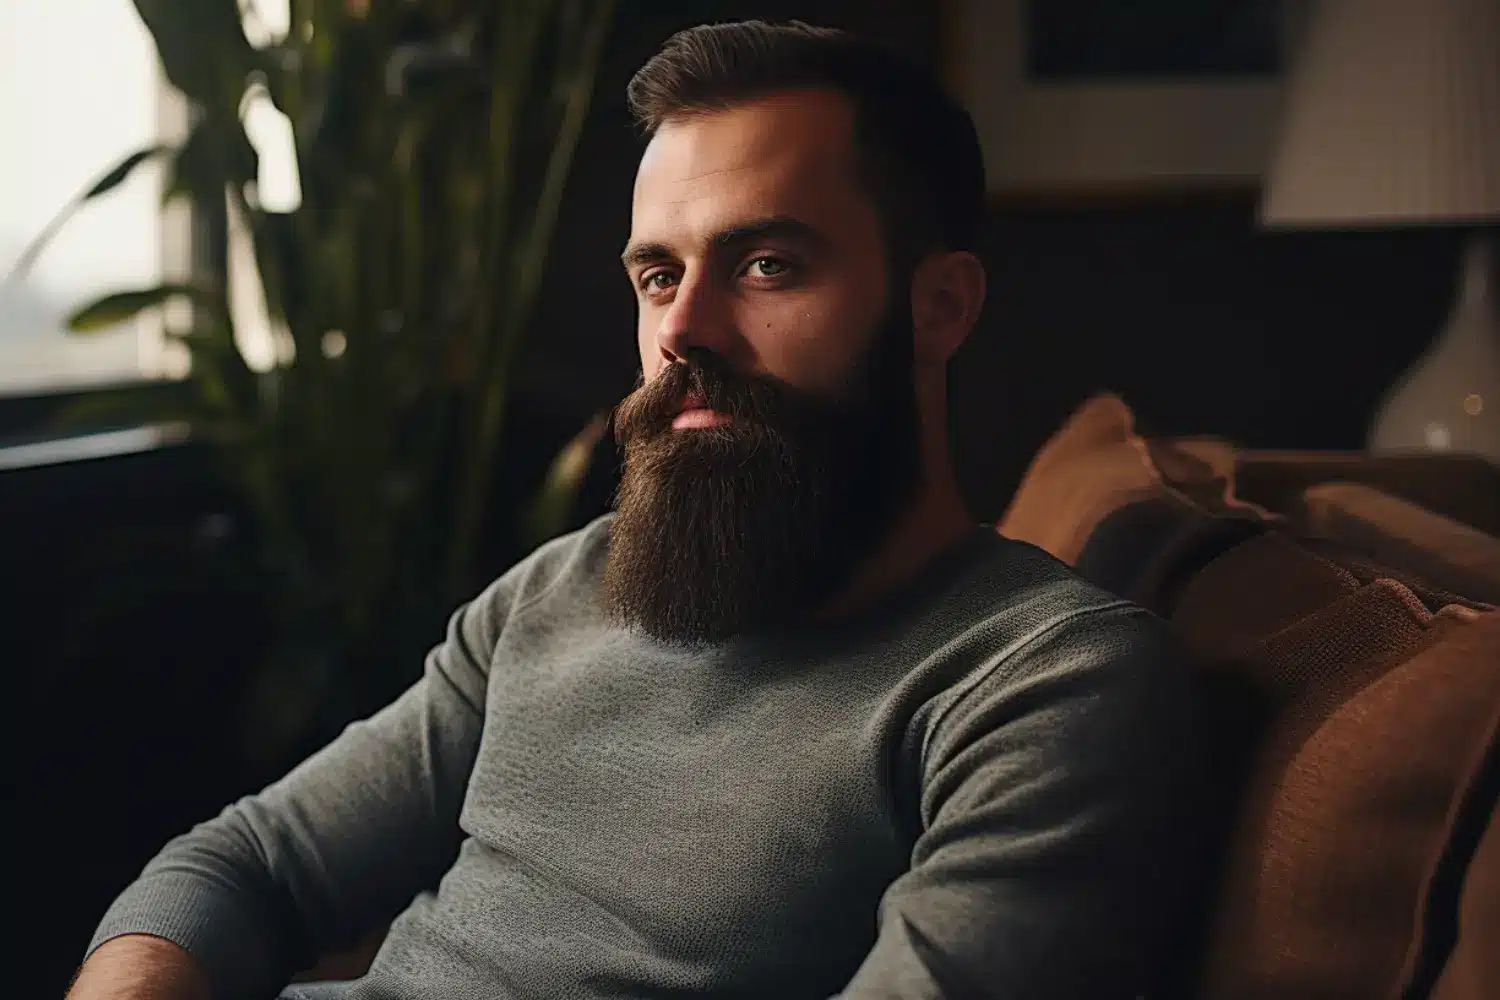 man with a beard sitting on a couch